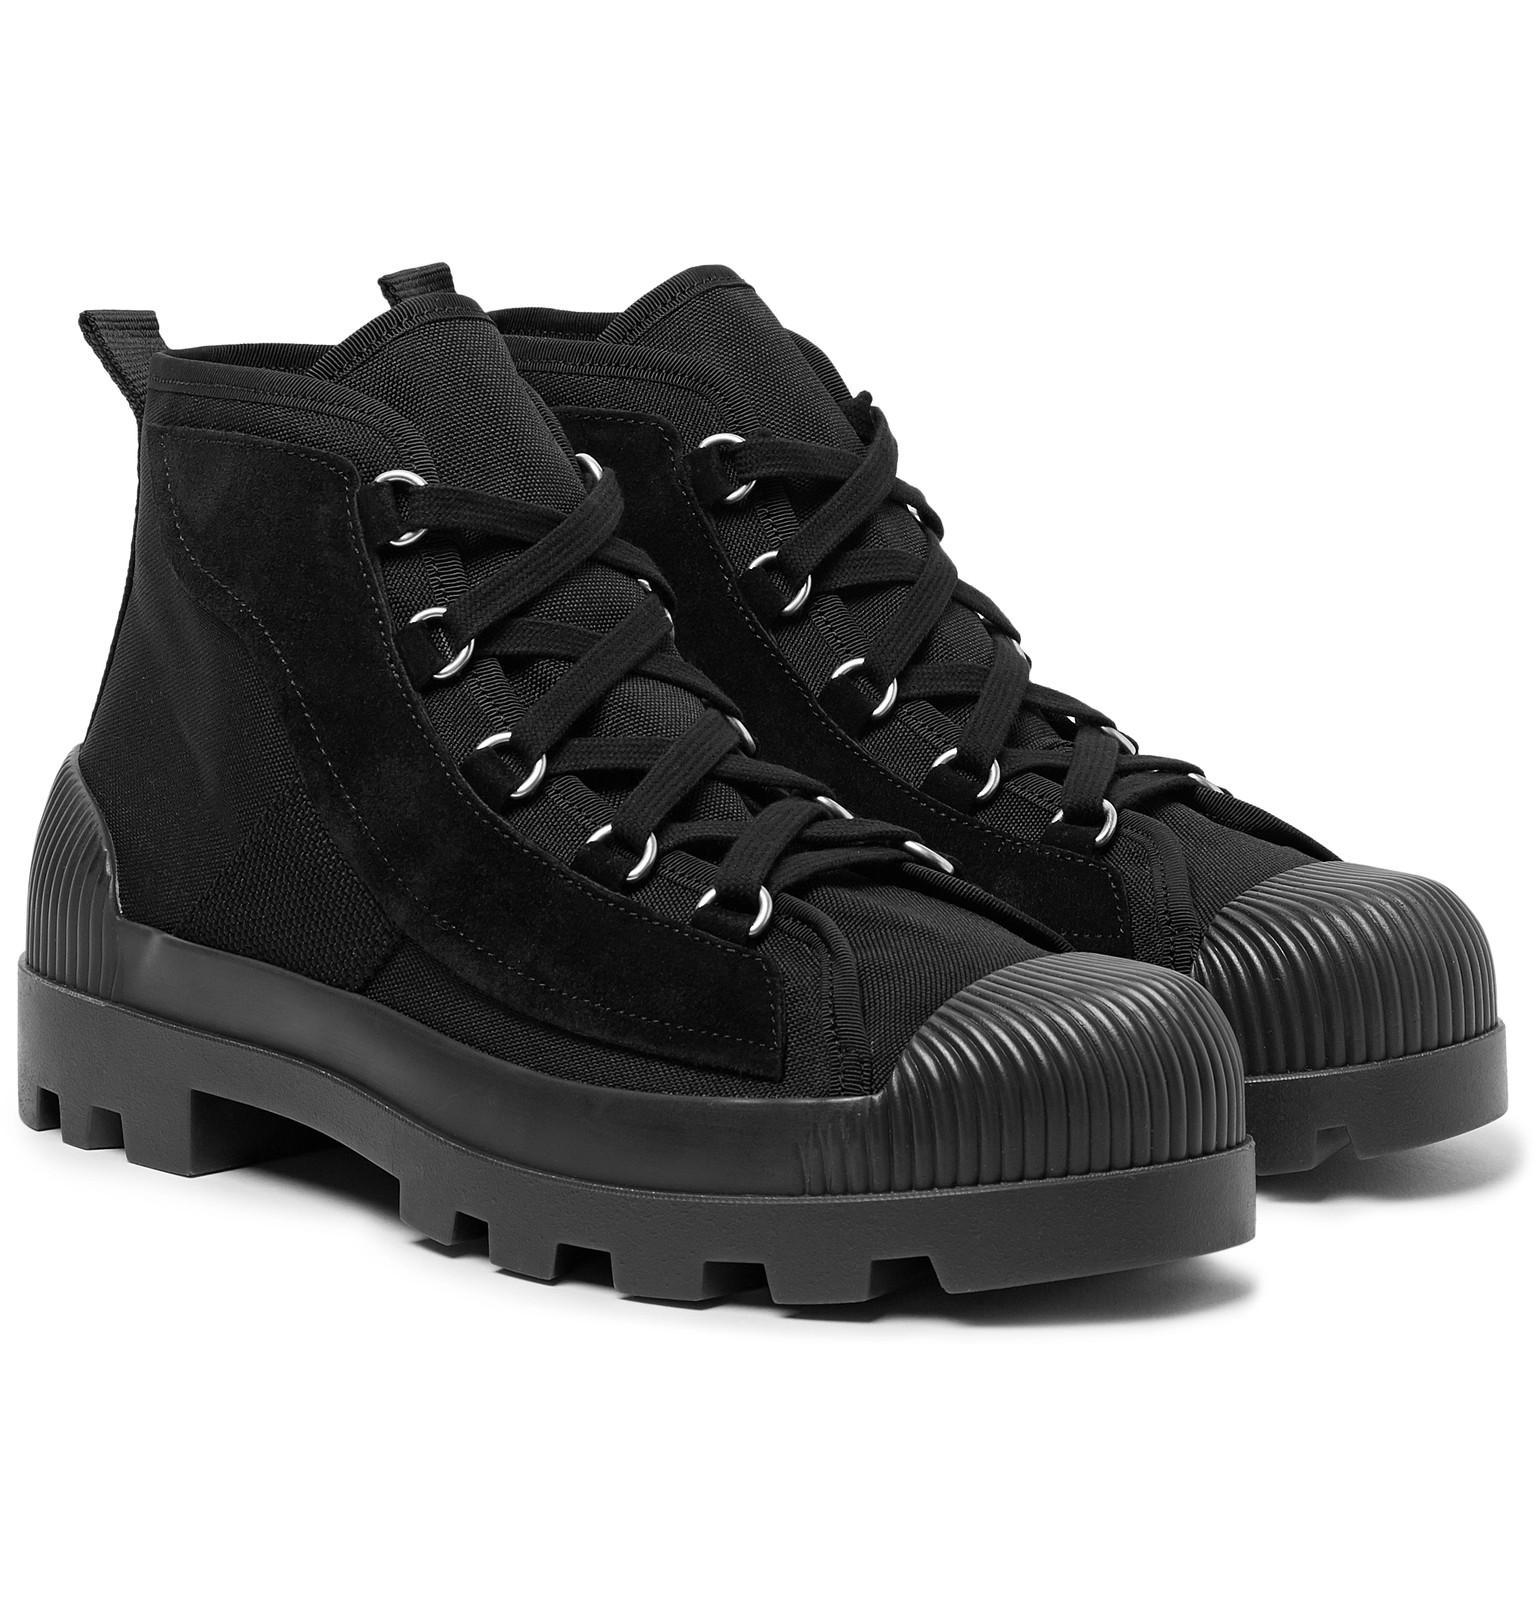 Acne Studios Daniel Suede-panelled Canvas Boots in Black for Men | Lyst